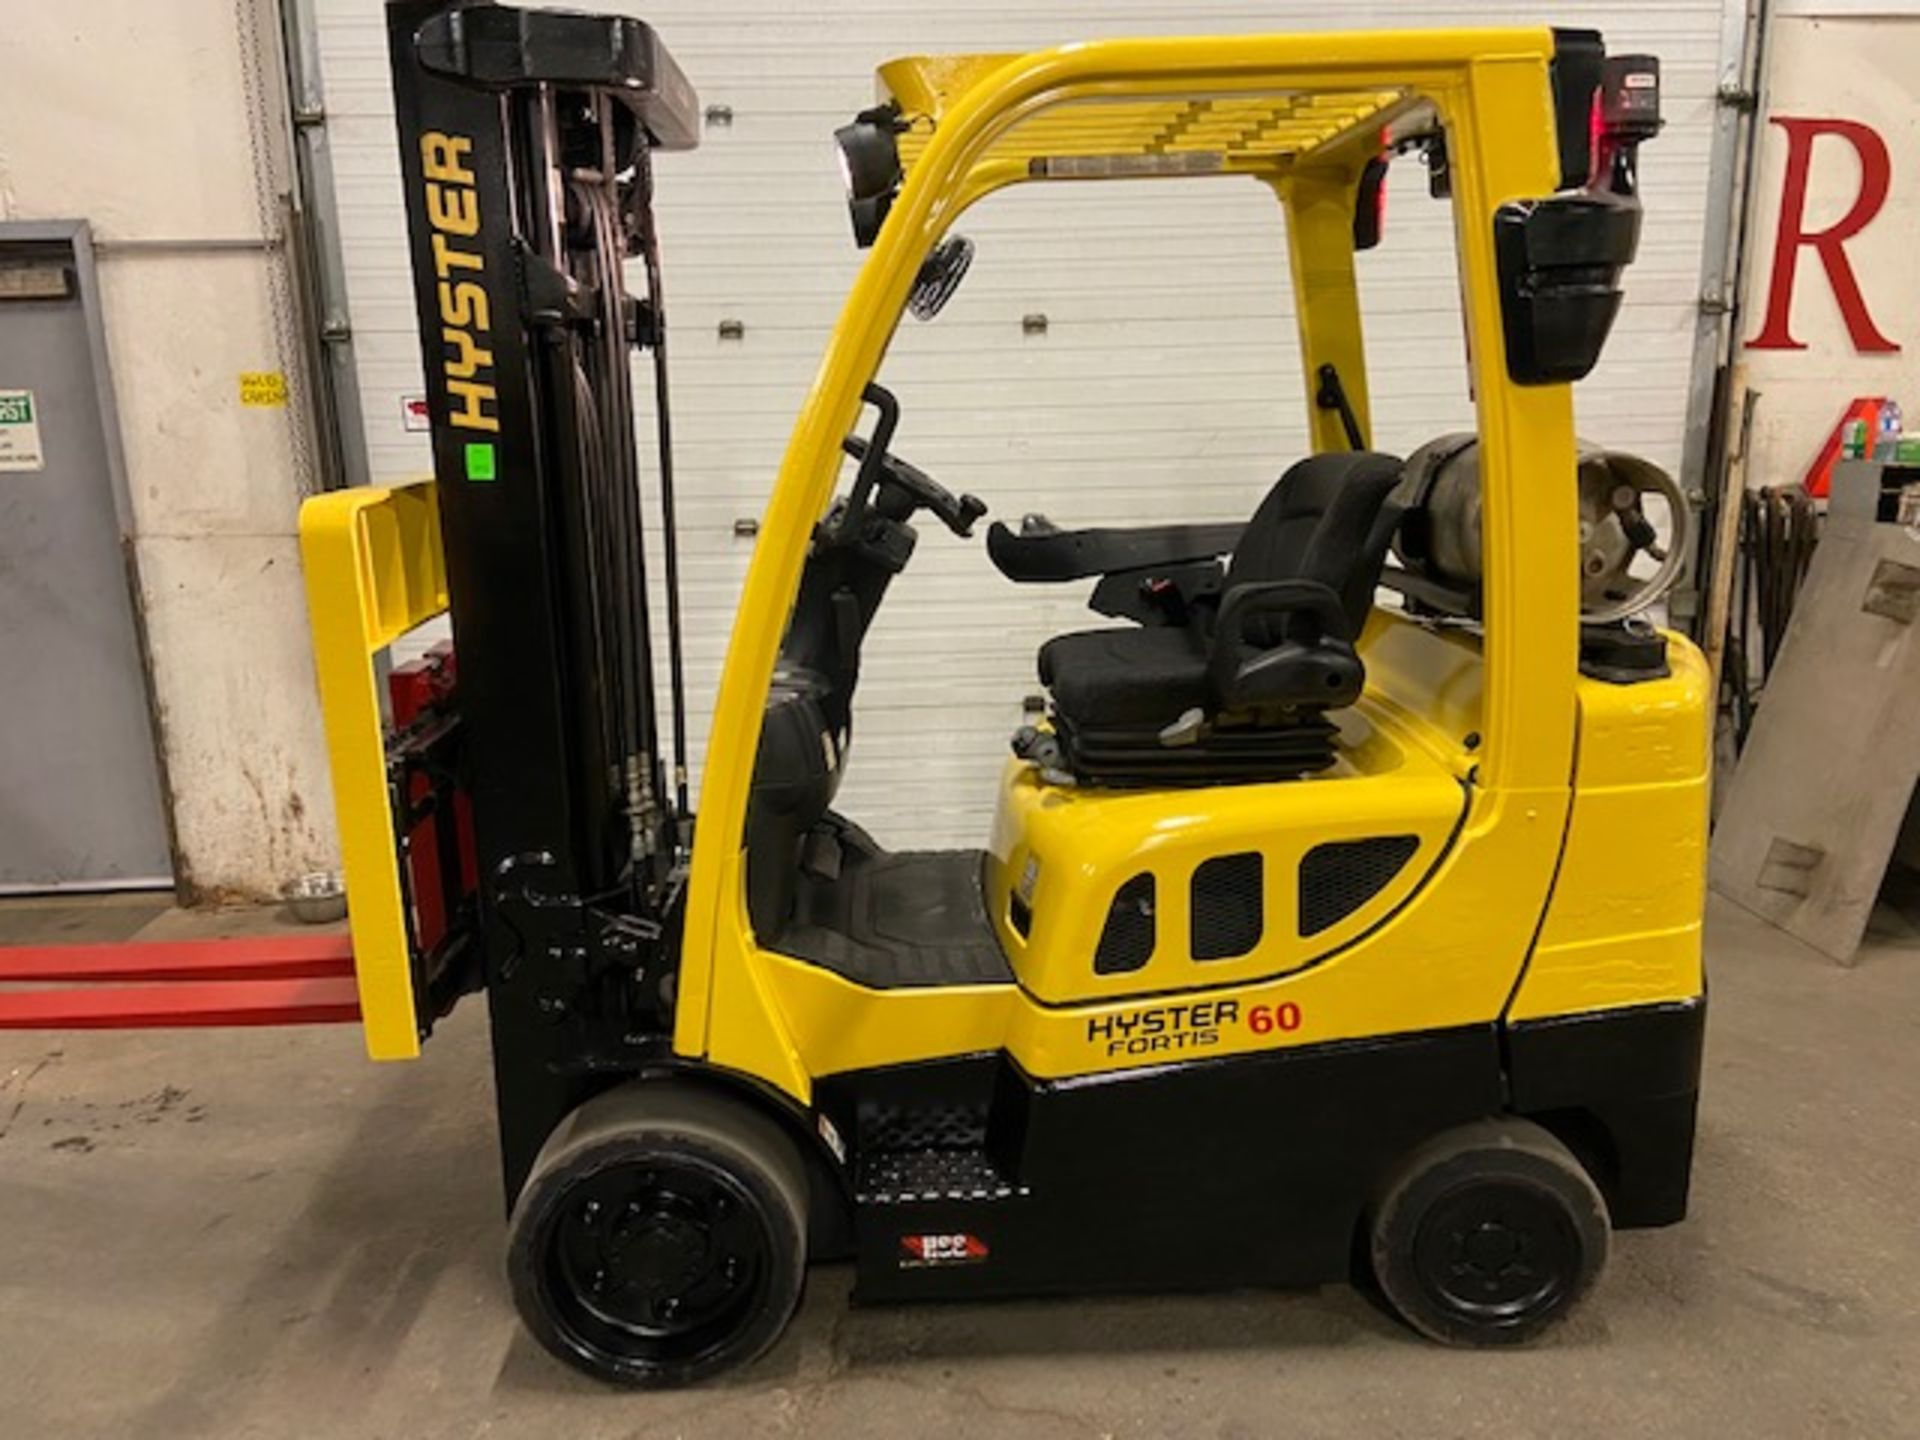 FREE CUSTOMS - 2016 Hyster 6000lbs Capacity Forklift LPG (propane) with 3-STAGE MAST with sideshift